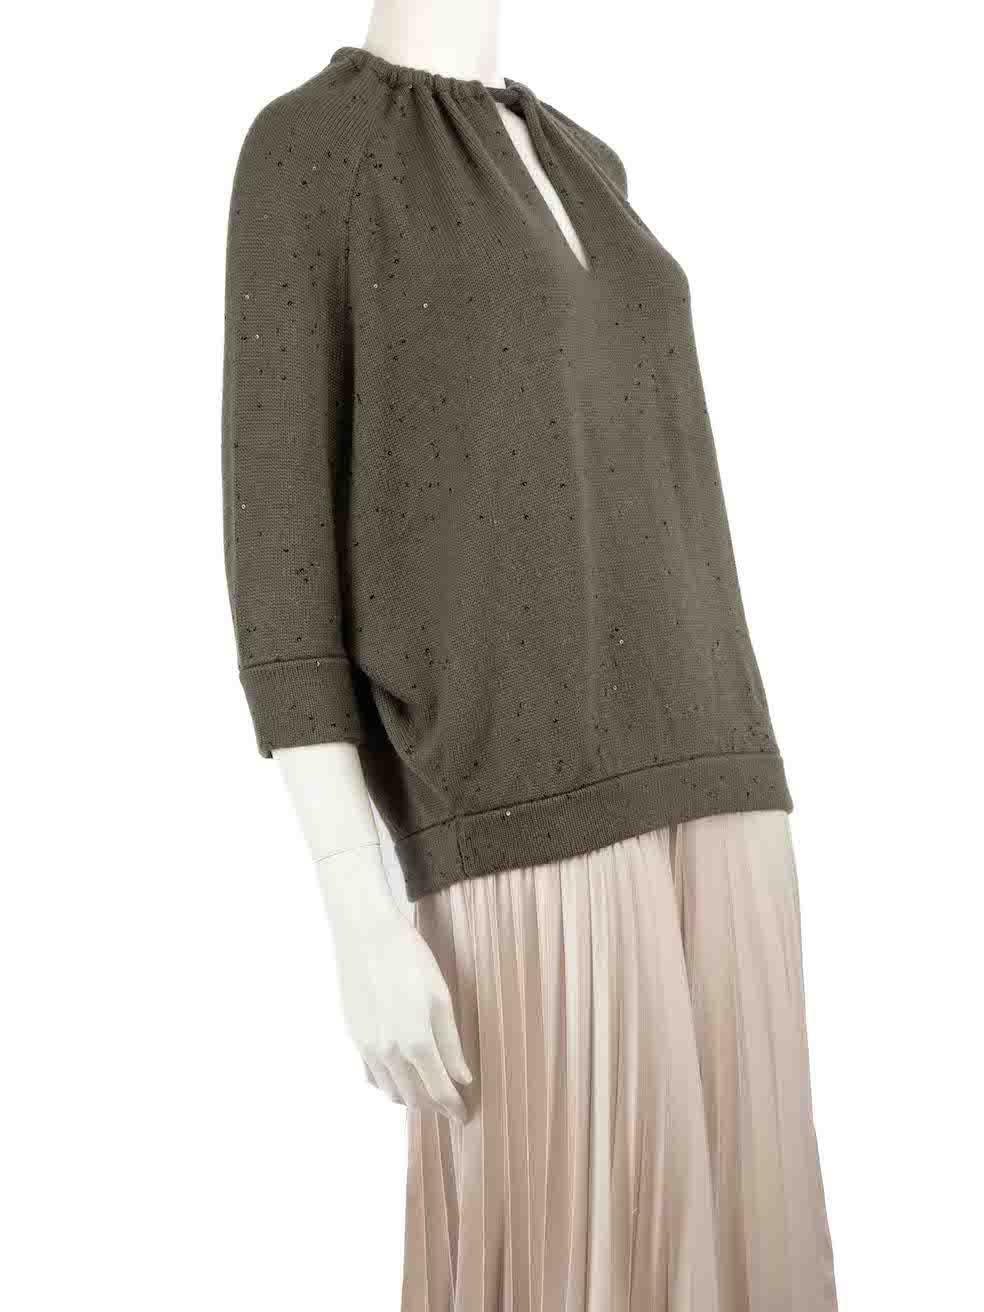 CONDITION is Never worn. No visible wear to jumper is evident on this new Brunello Cucinelli designer resale item.
 
 
 
 Details
 
 
 Khaki
 
 Cashmere
 
 Mid sleeves top
 
 Knitted and stretchy
 
 Sequinned
 
 Keyhole neckline
 
 Beaded drawstring